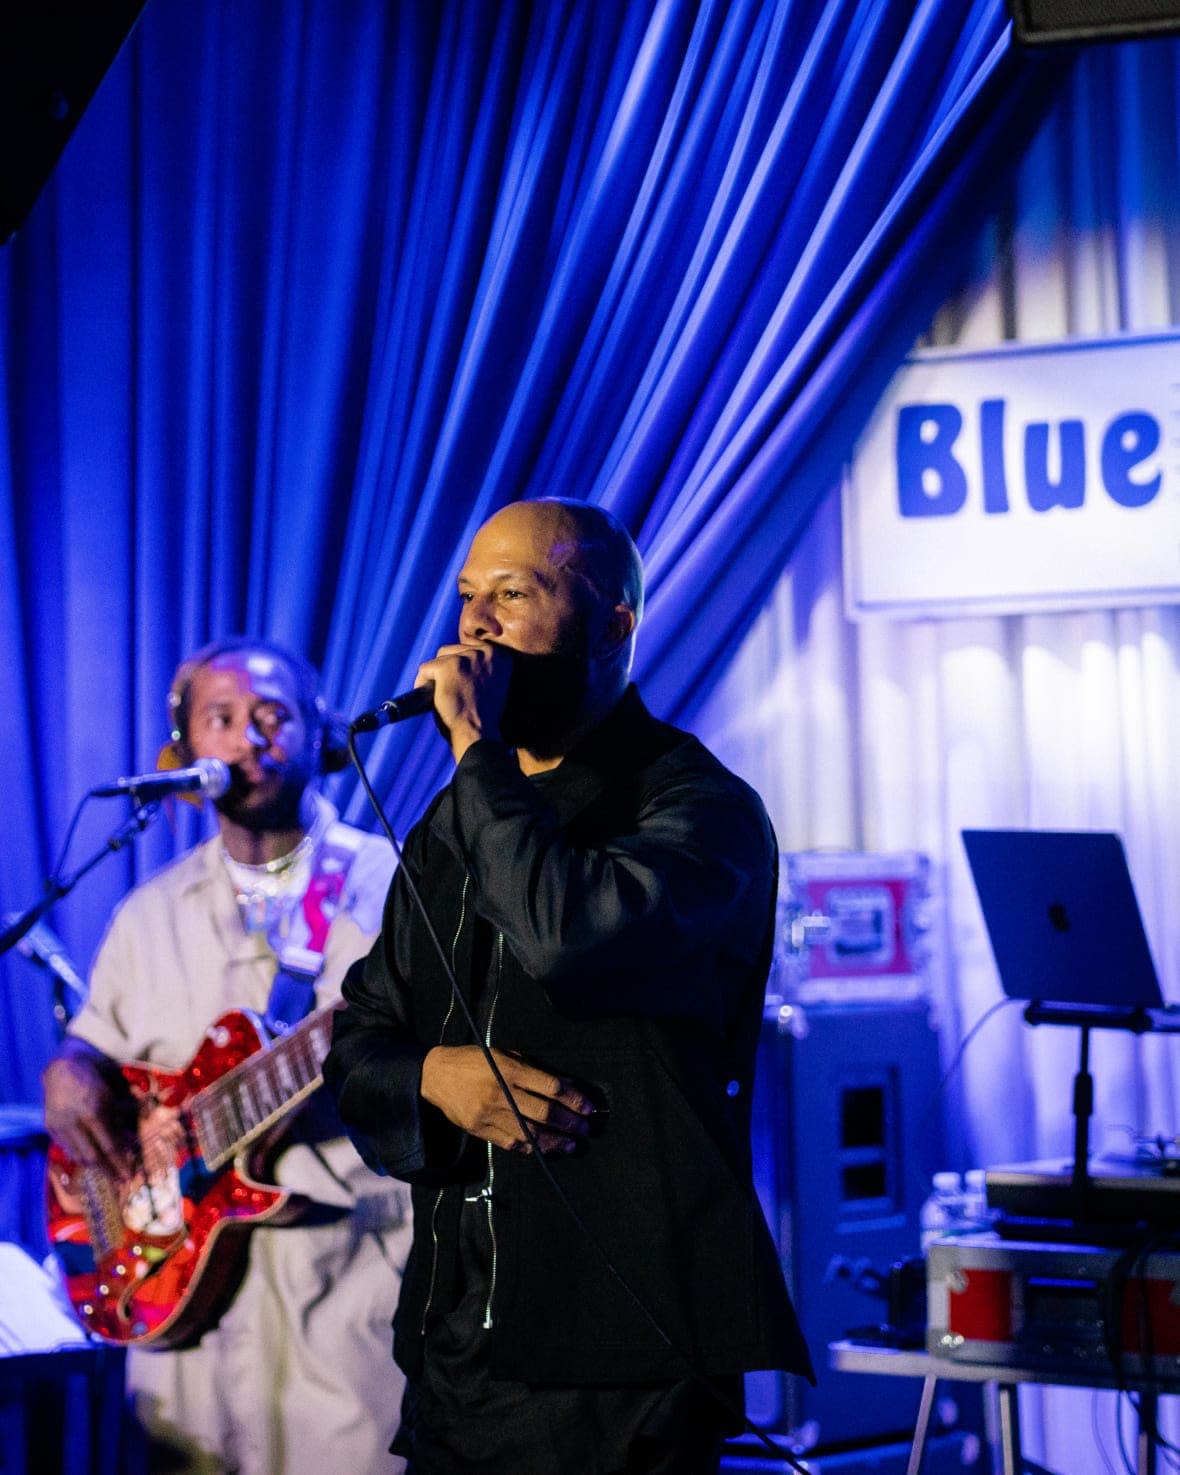 Thundercat and Common perform at the Blue Note Jazz Club. (Photo provided by Shore Fire Media)